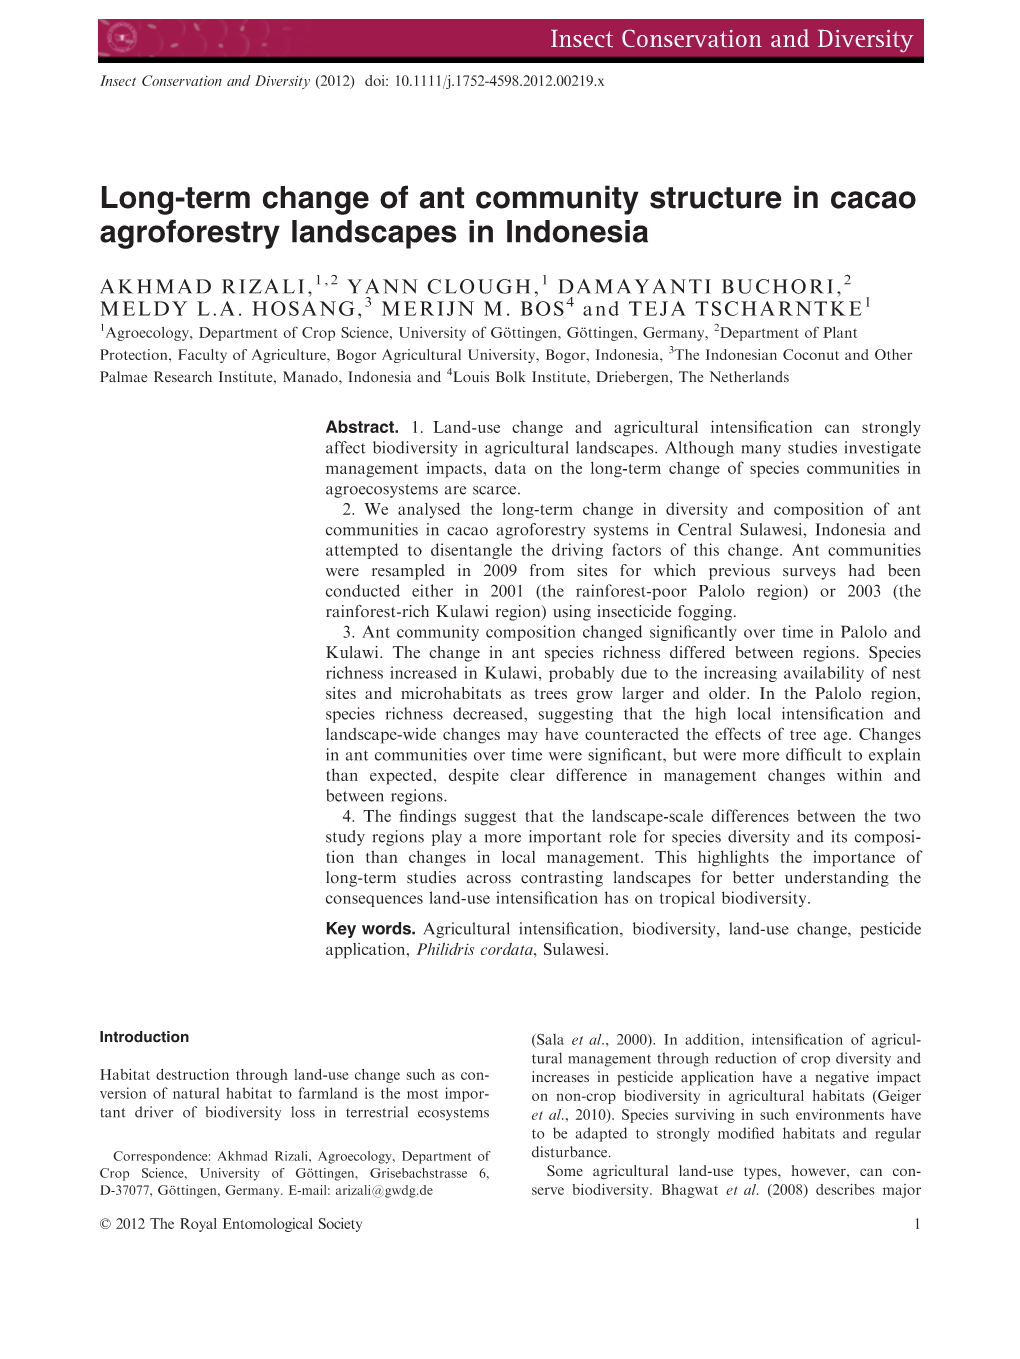 Longterm Change of Ant Community Structure in Cacao Agroforestry